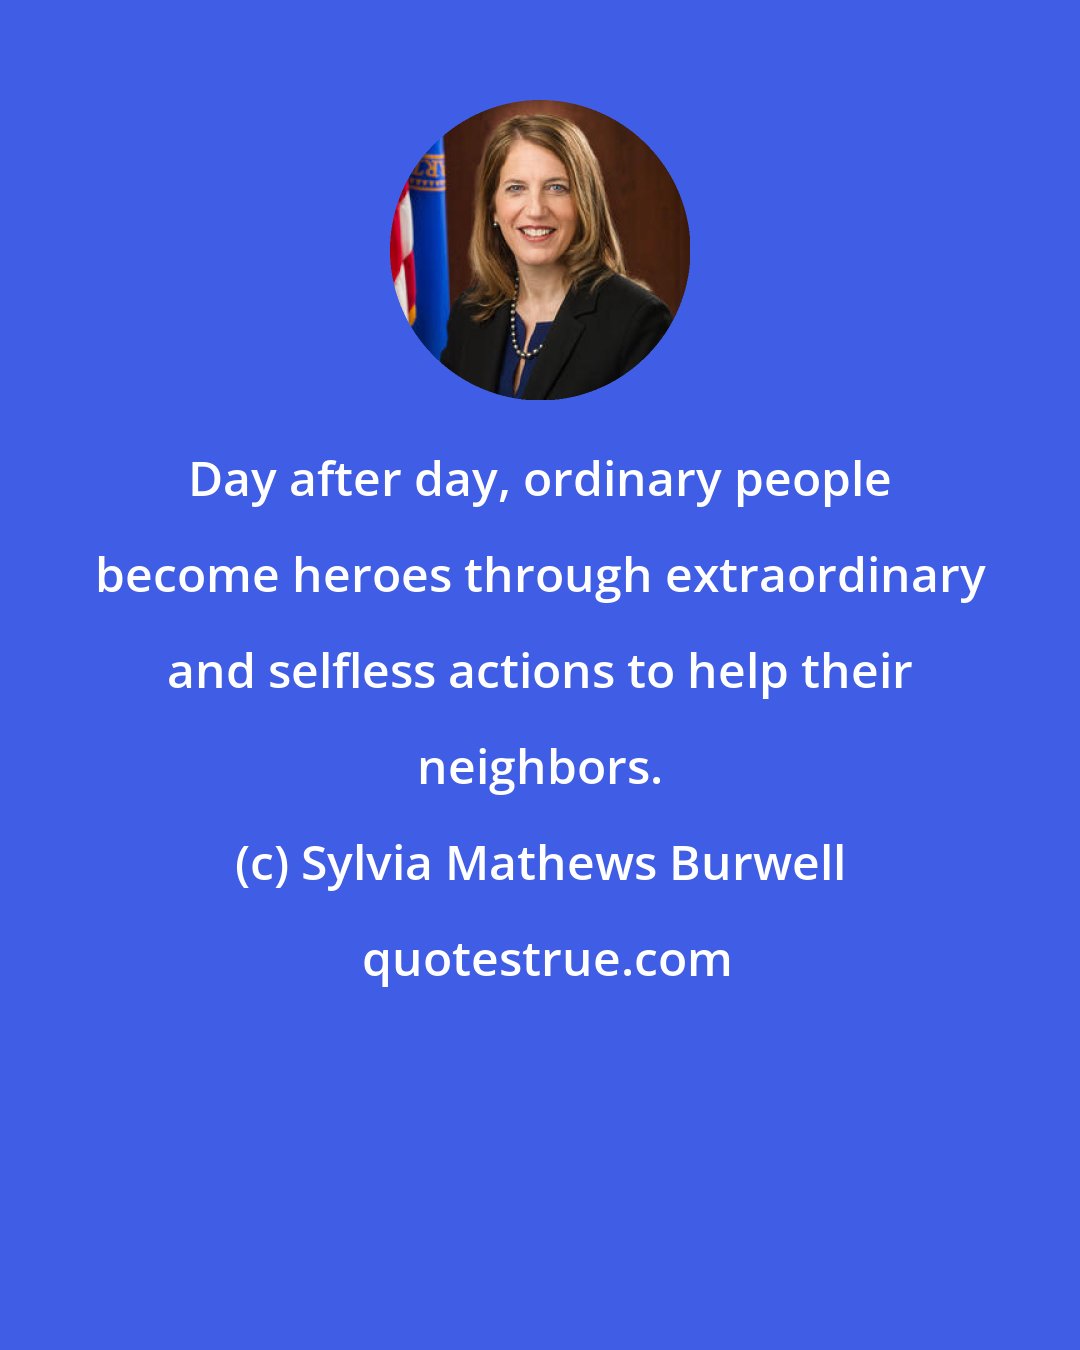 Sylvia Mathews Burwell: Day after day, ordinary people become heroes through extraordinary and selfless actions to help their neighbors.